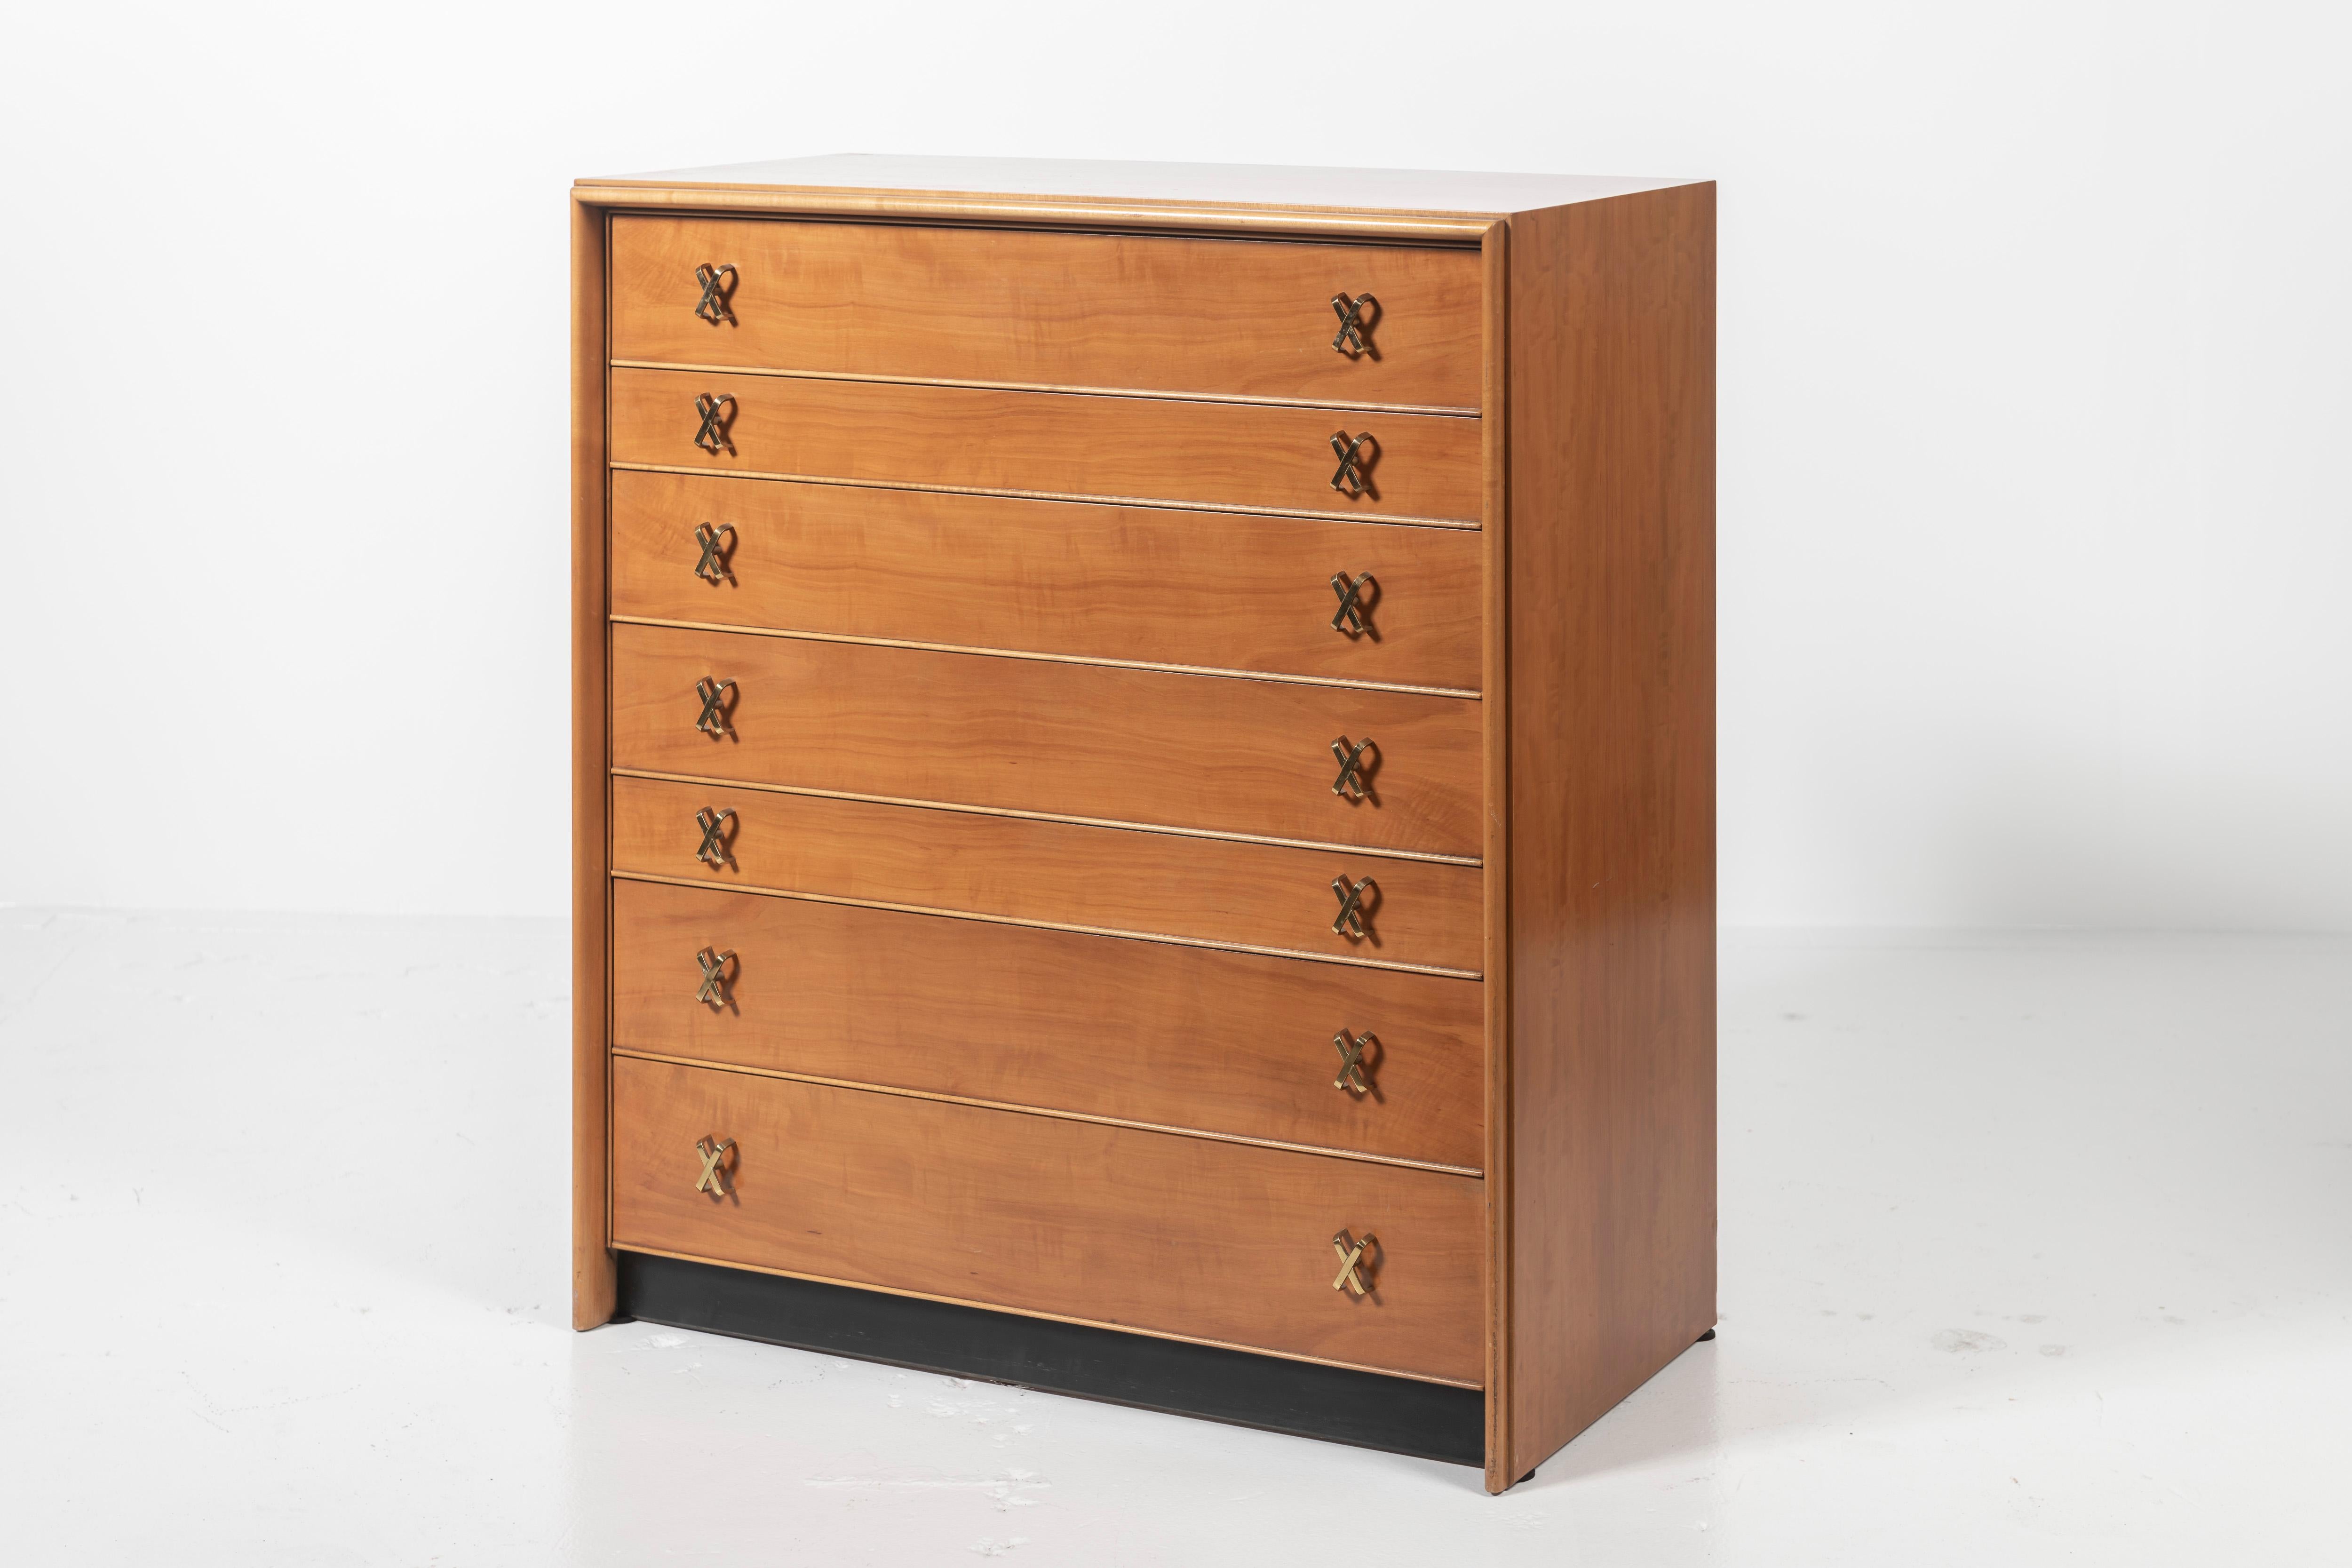 An elegant high chest from Paul Frankl’s Debonaire series for Johnson Furniture Co., the chest features seven drawers with signature X-shaped pulls in brass-plated aluminum. Constructed of pearwood and oak, this piece is in overall good vintage